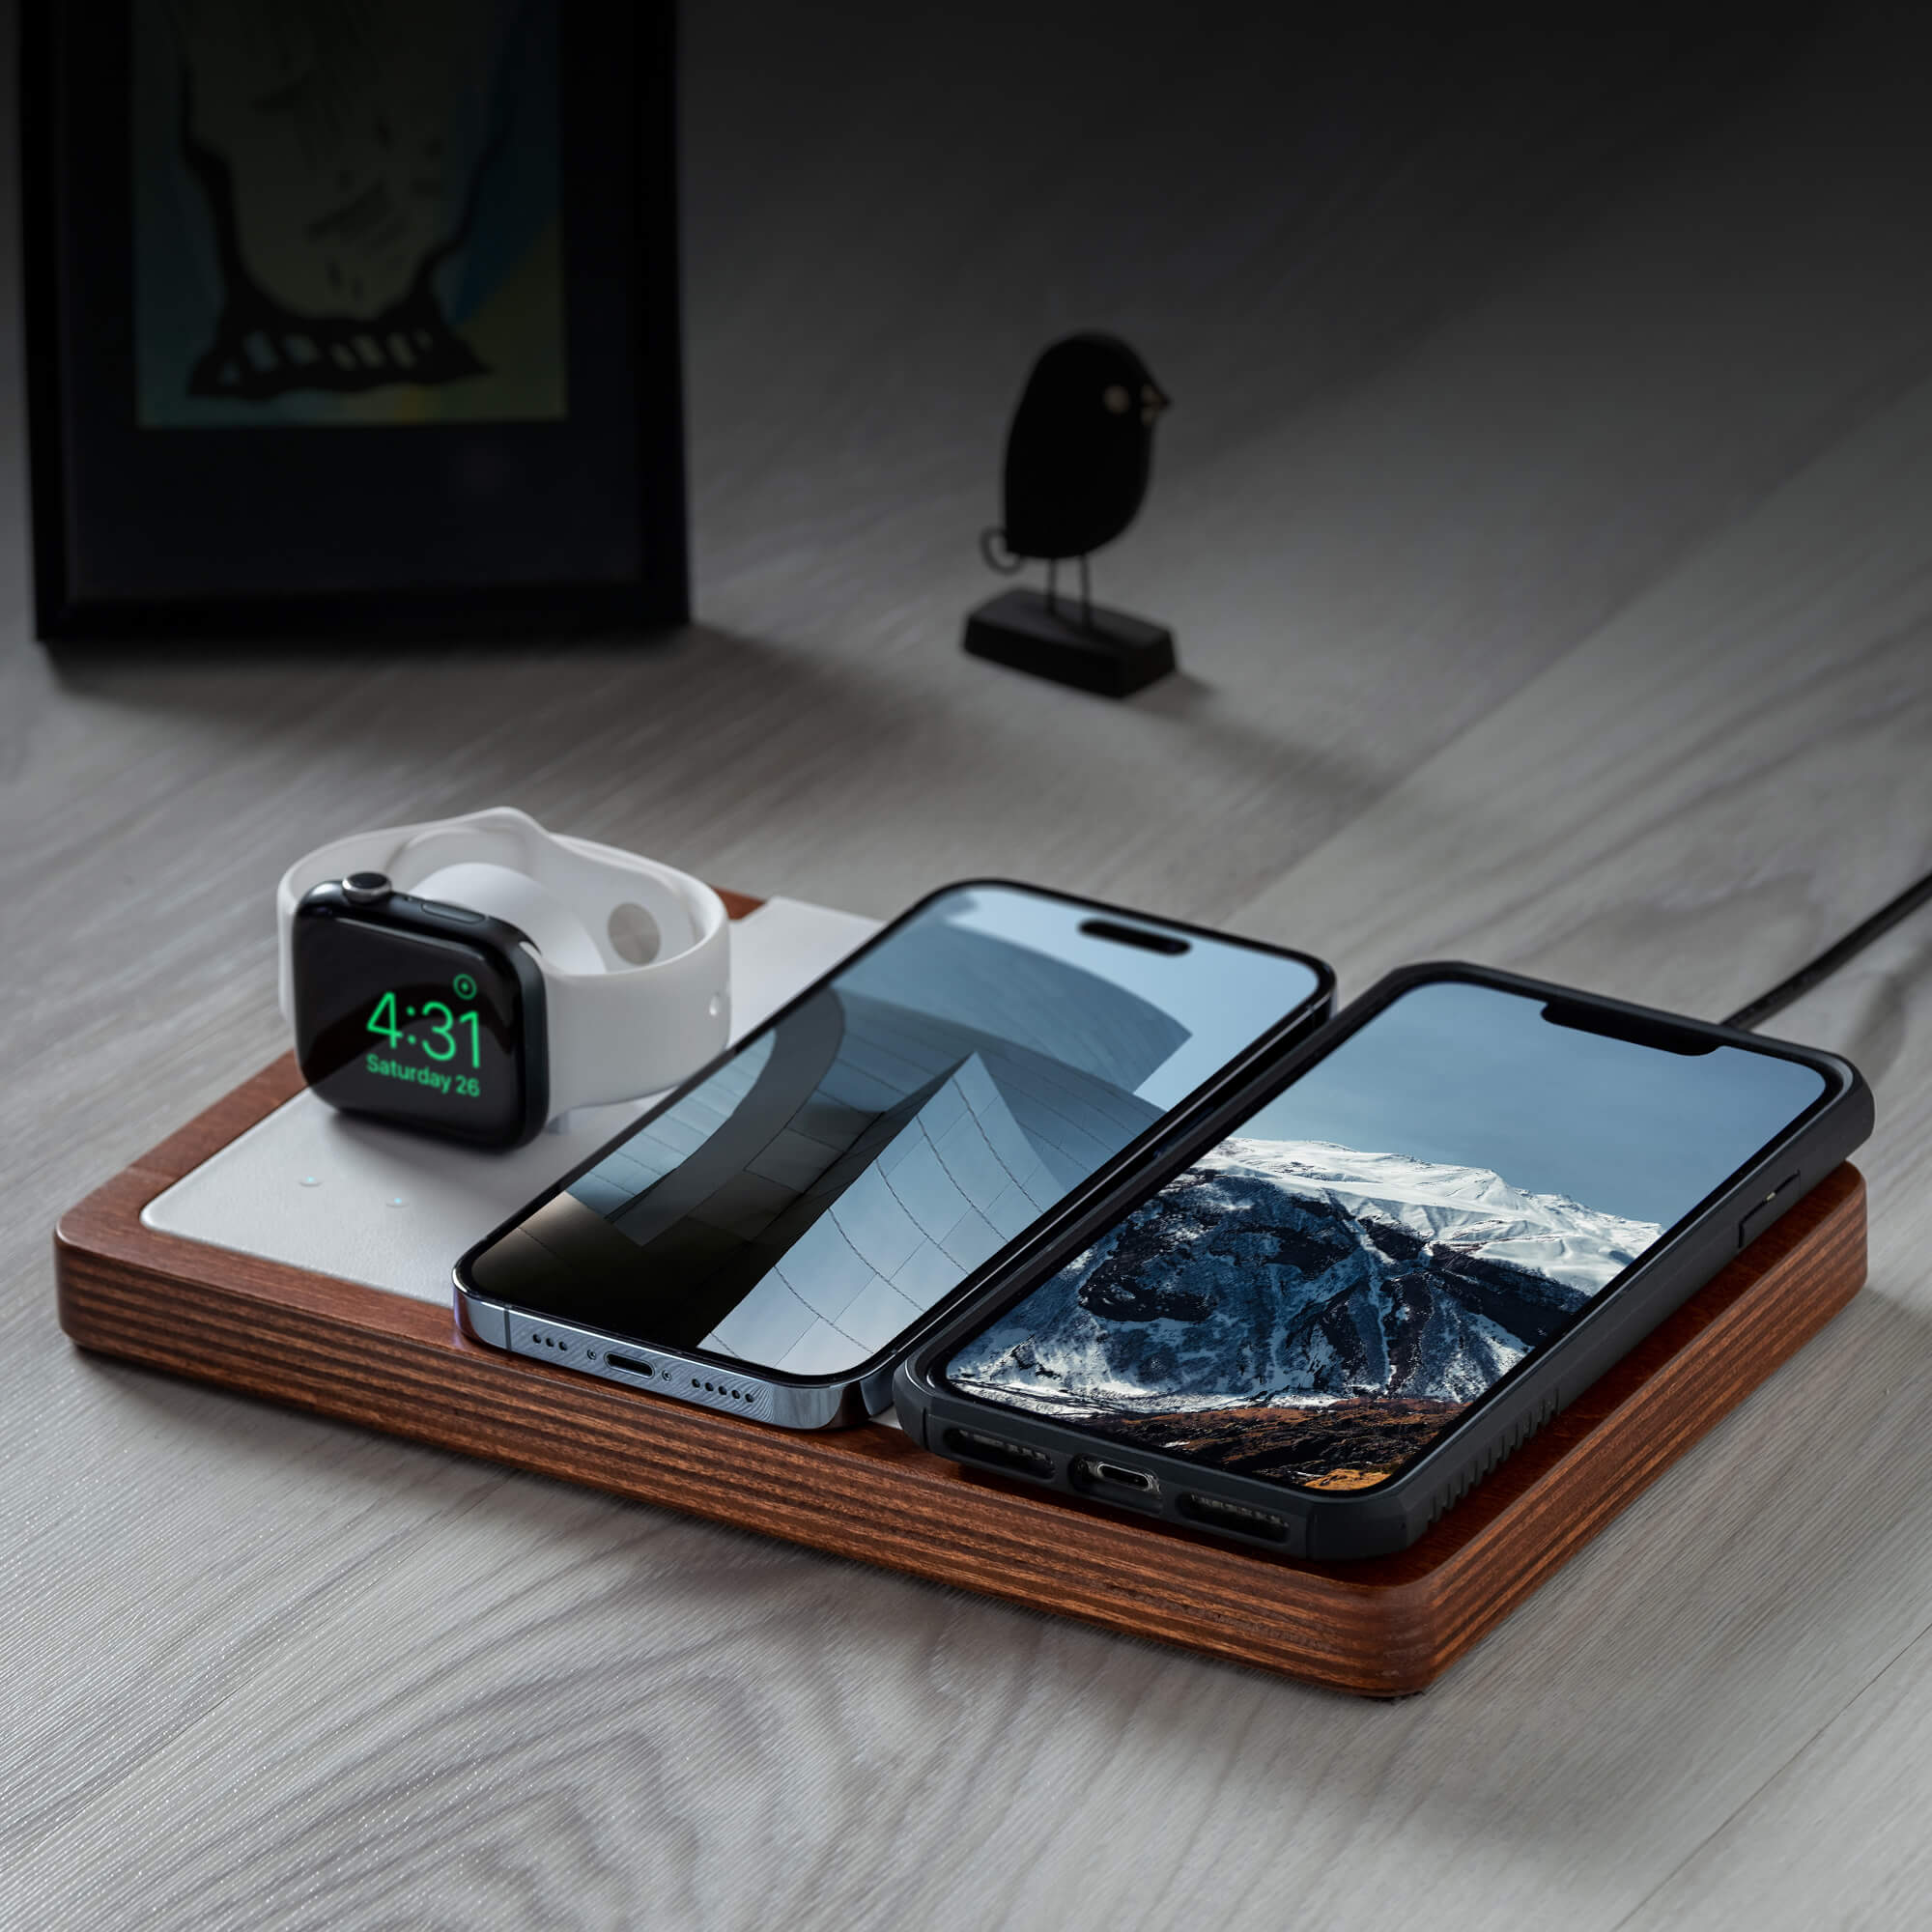 TRIO Black - 3-in-1 MagSafe Oak Wireless Charger with Apple Watch Support